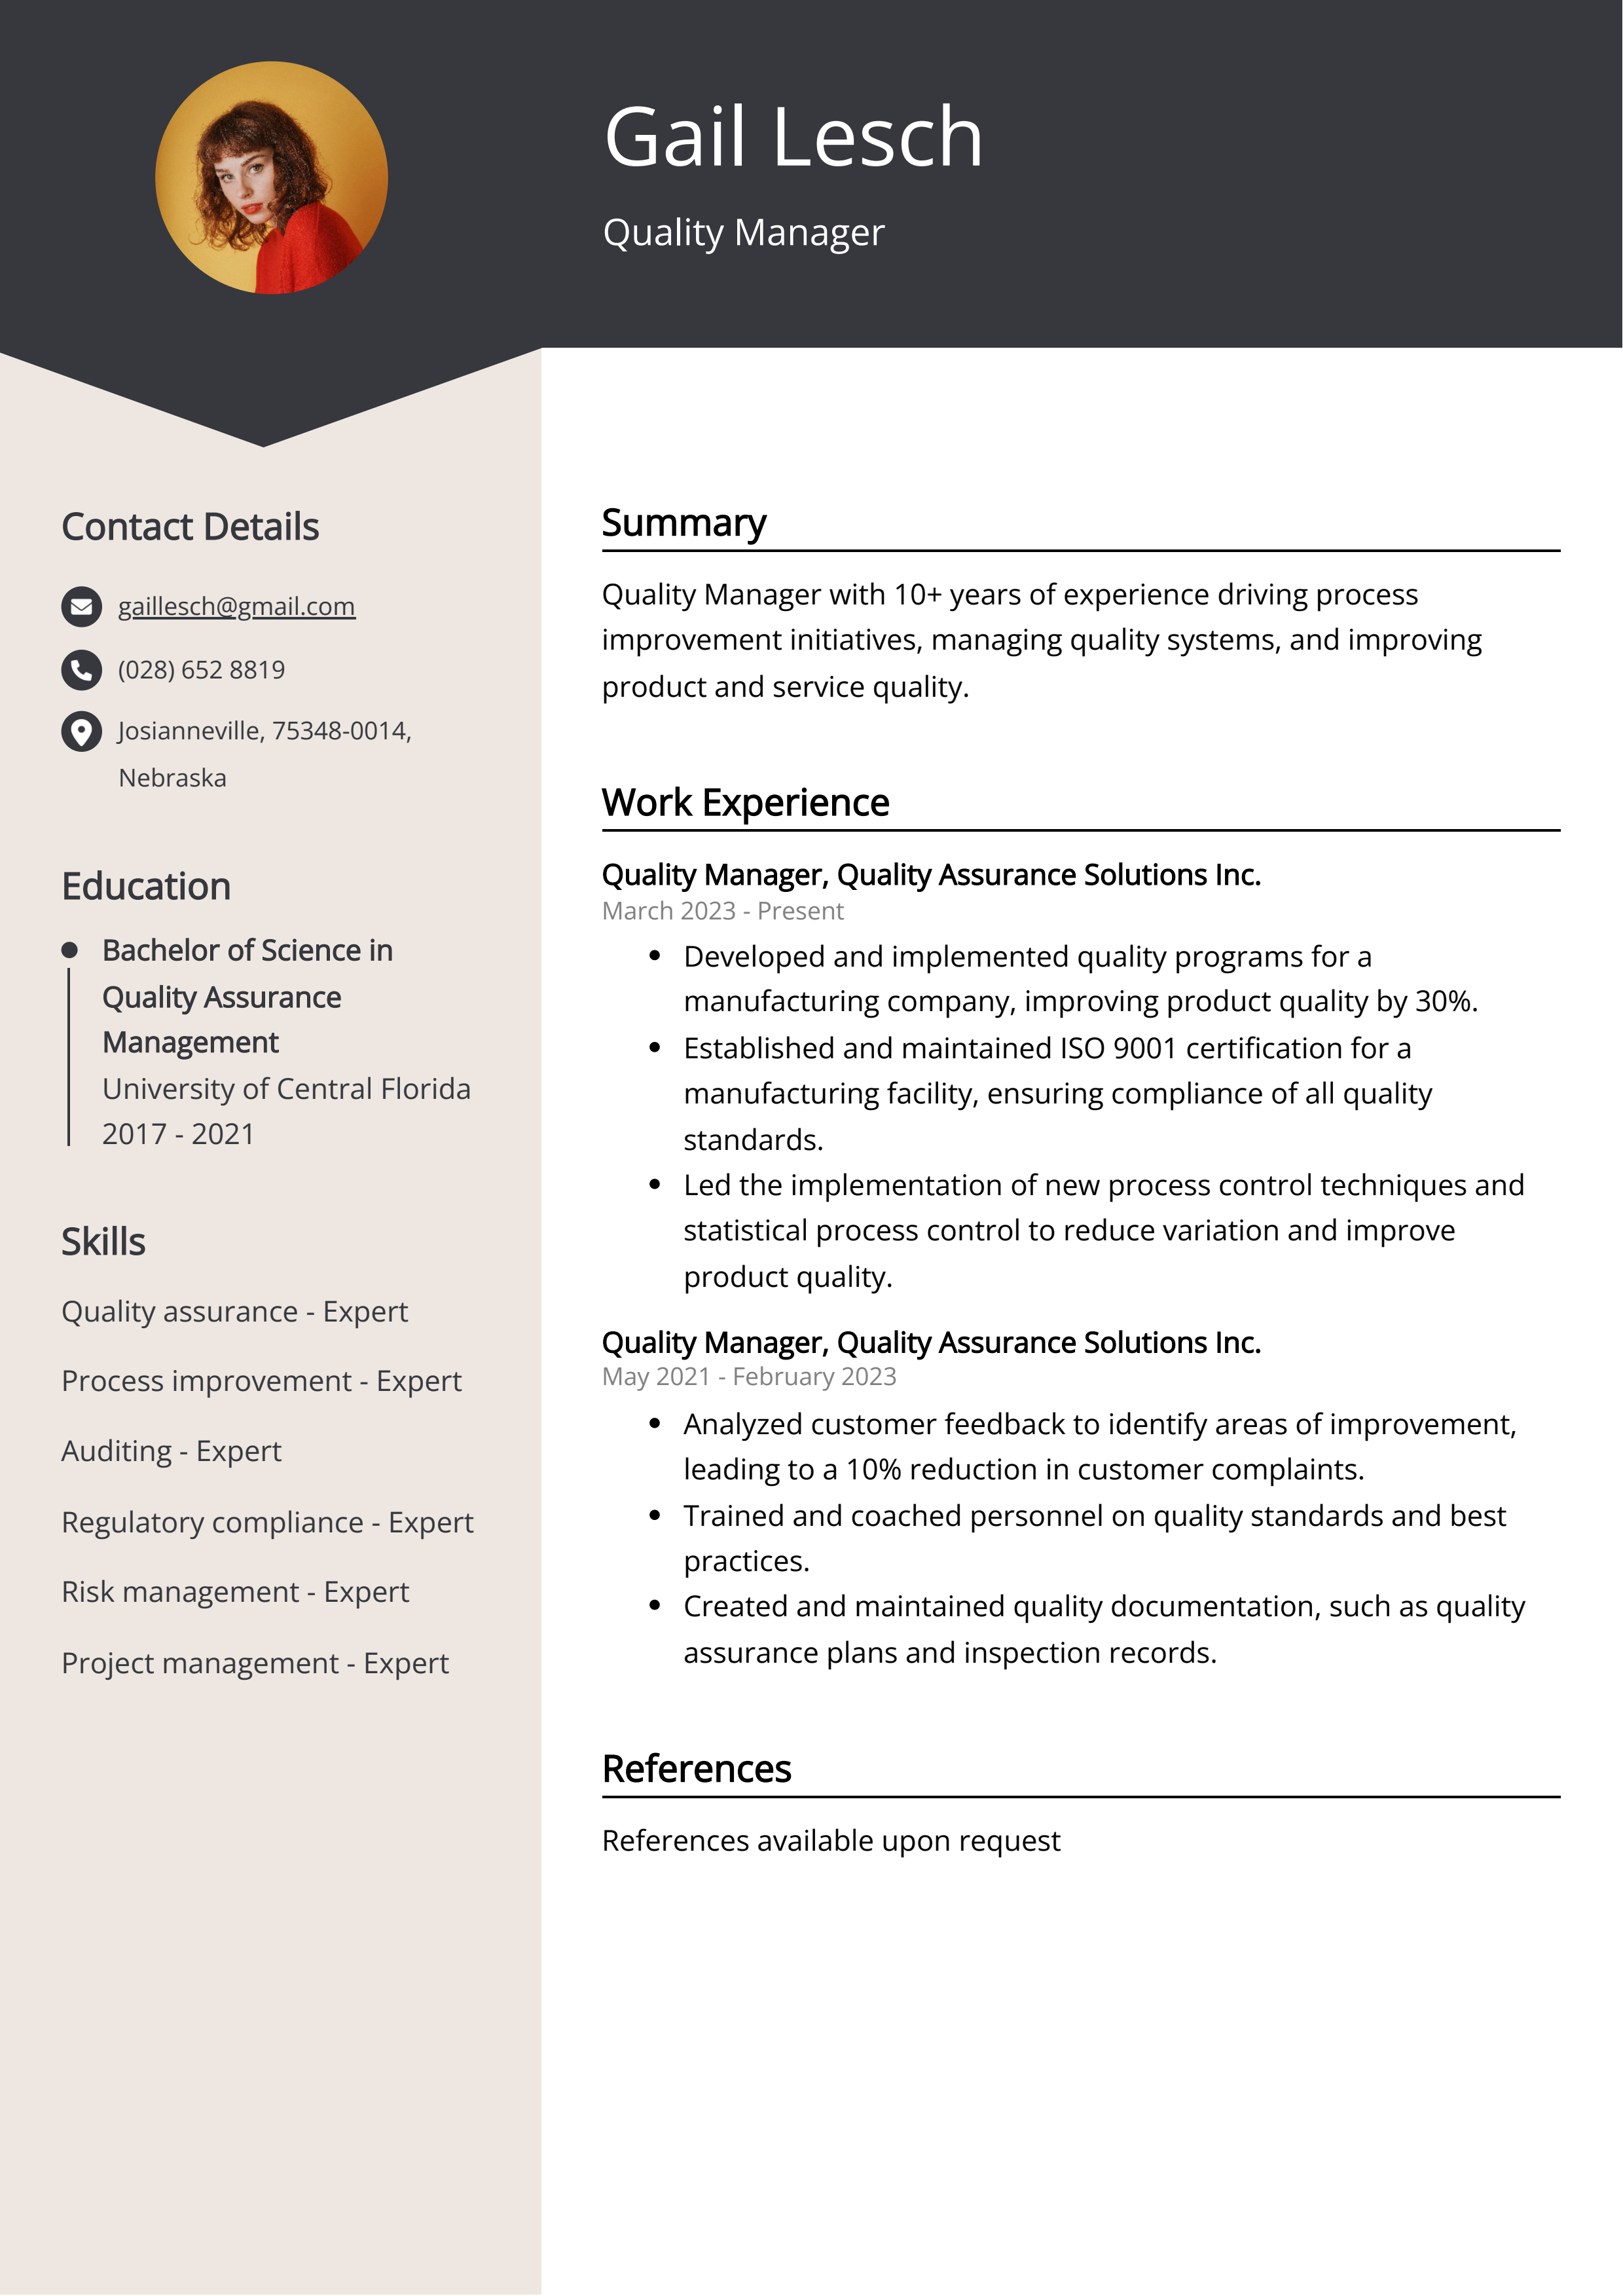 Quality Manager CV Example